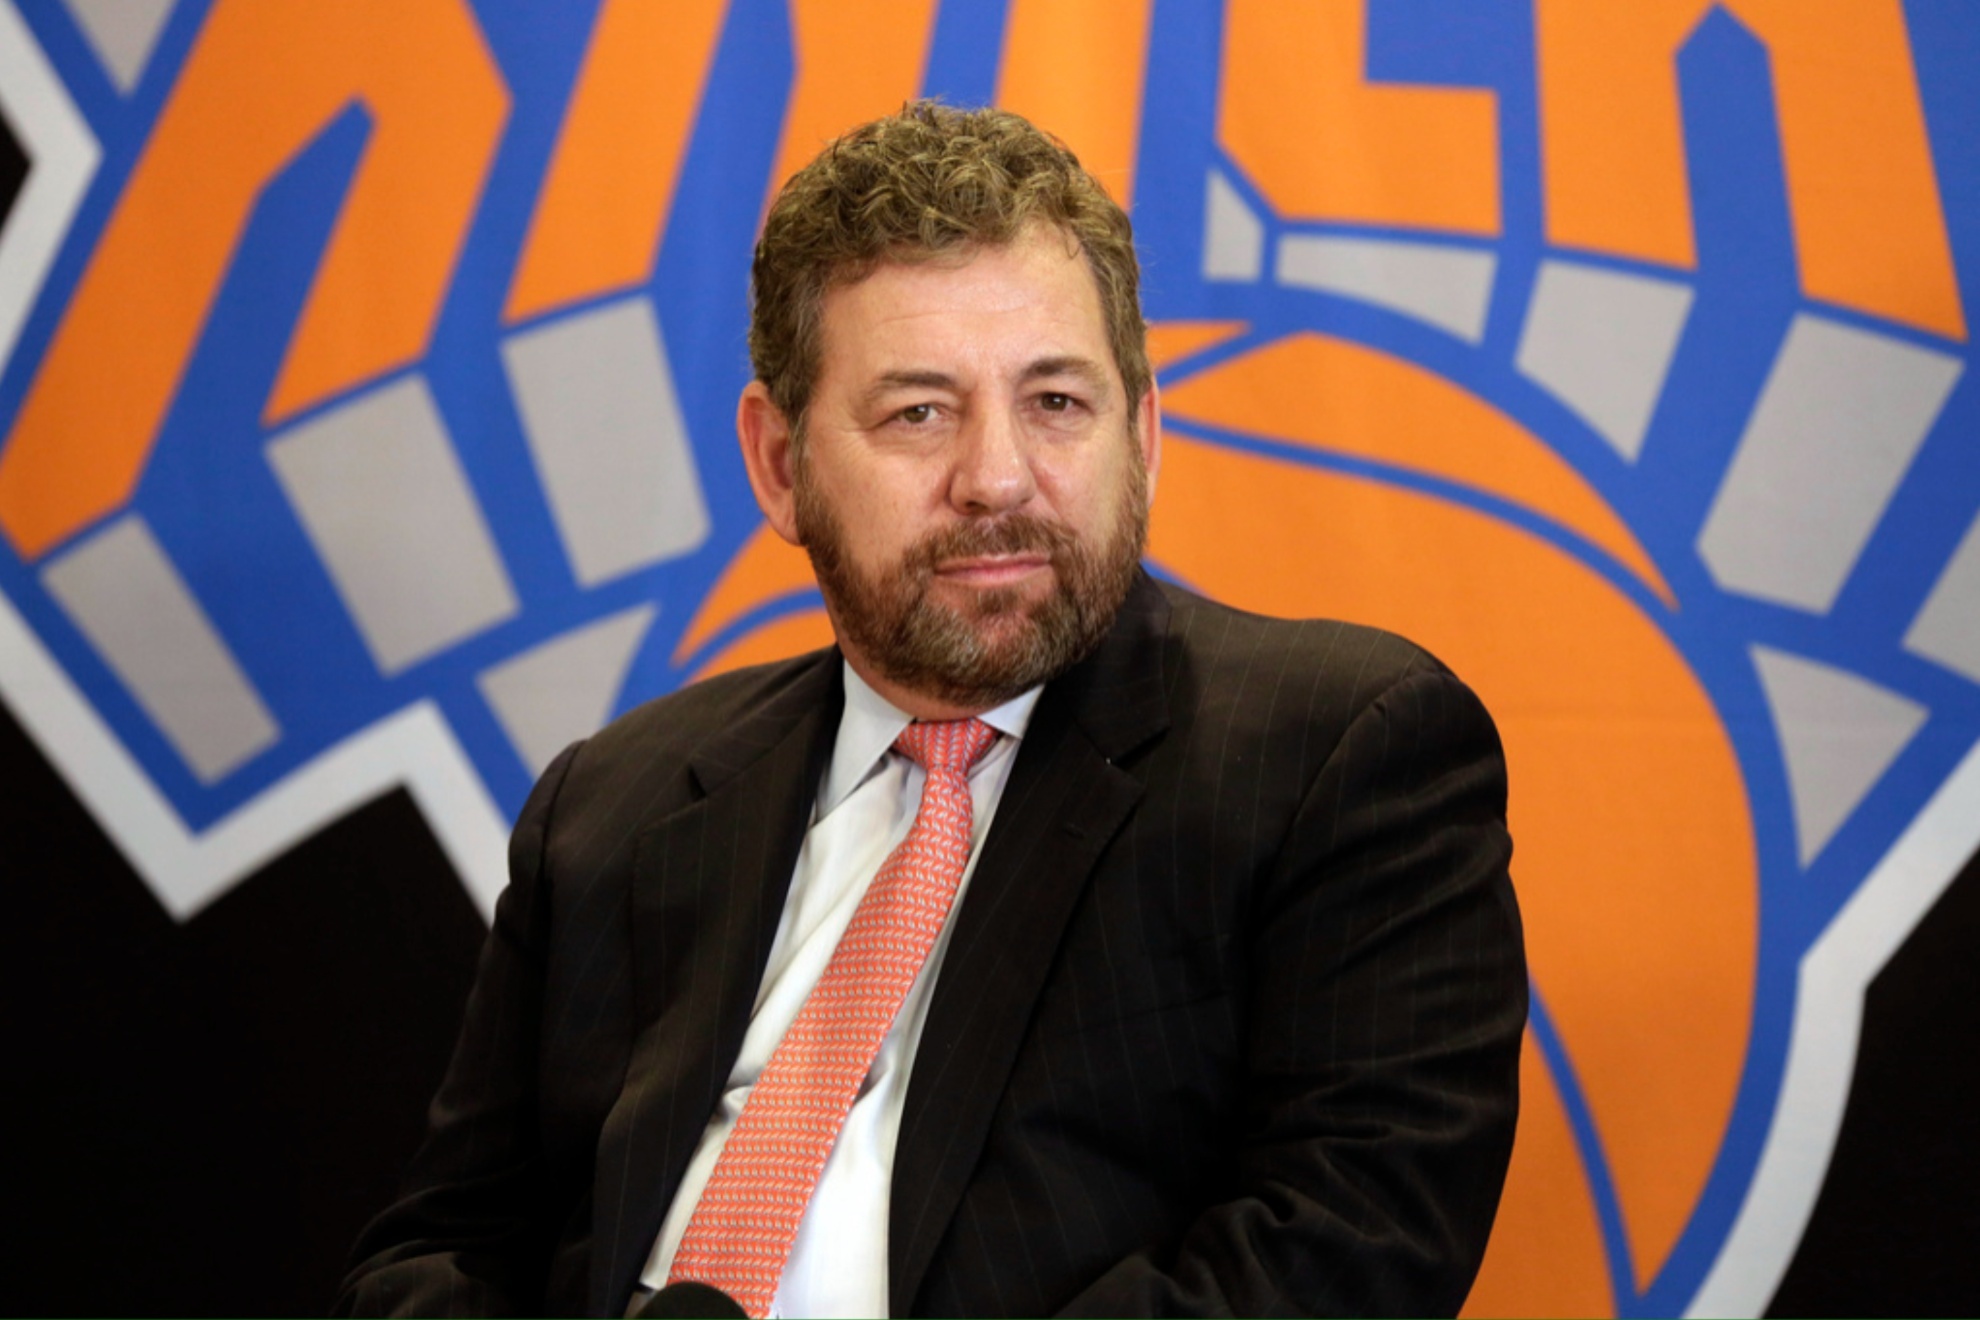 James Dolan, owner of the NY Knicks and NY Rangers, is being accused of sexual assault